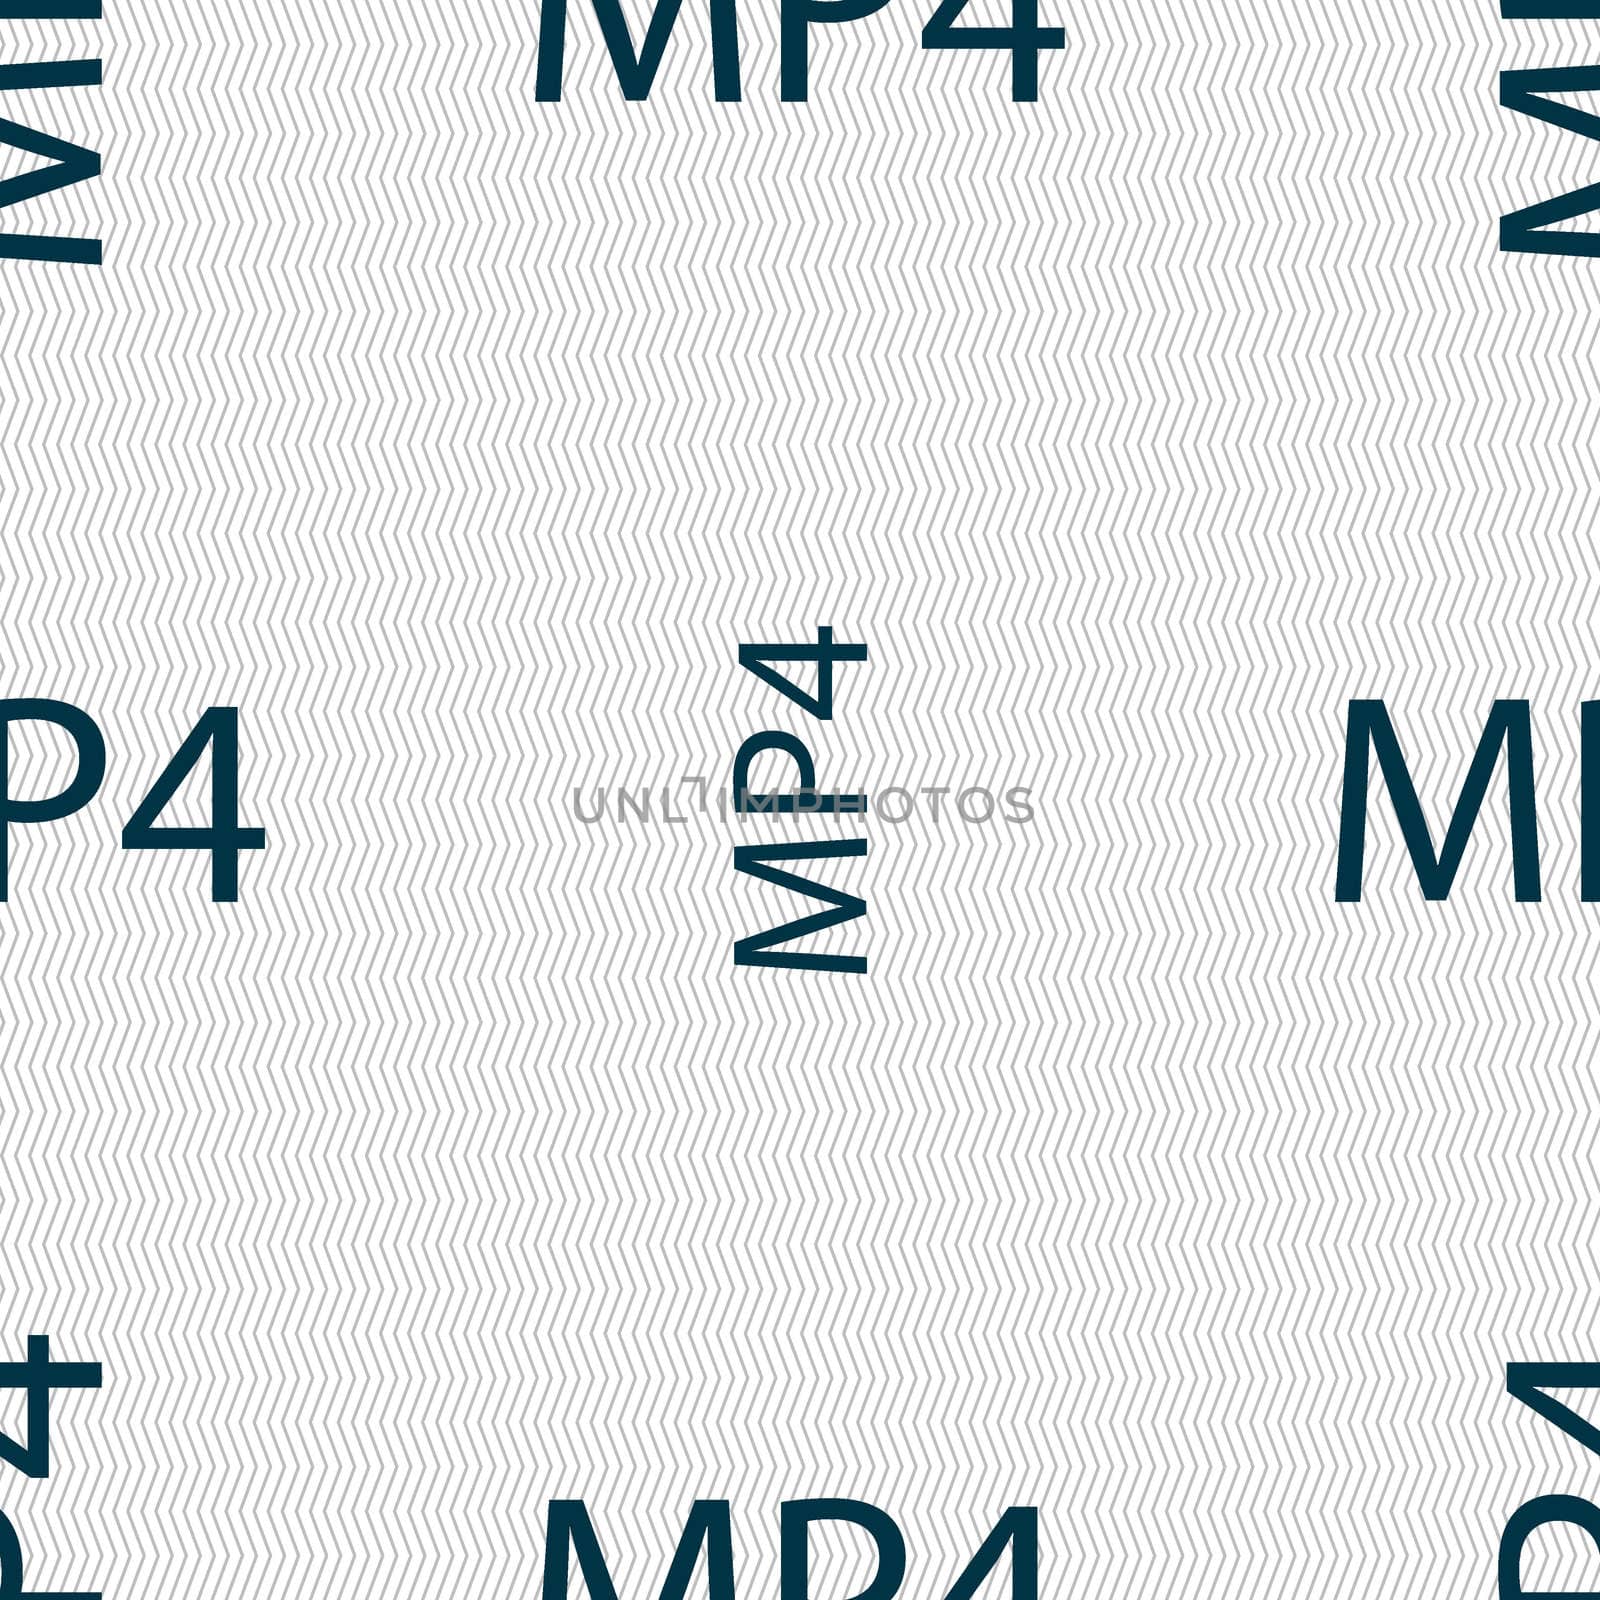 Mpeg4 video format sign icon. symbol. Seamless abstract background with geometric shapes. illustration